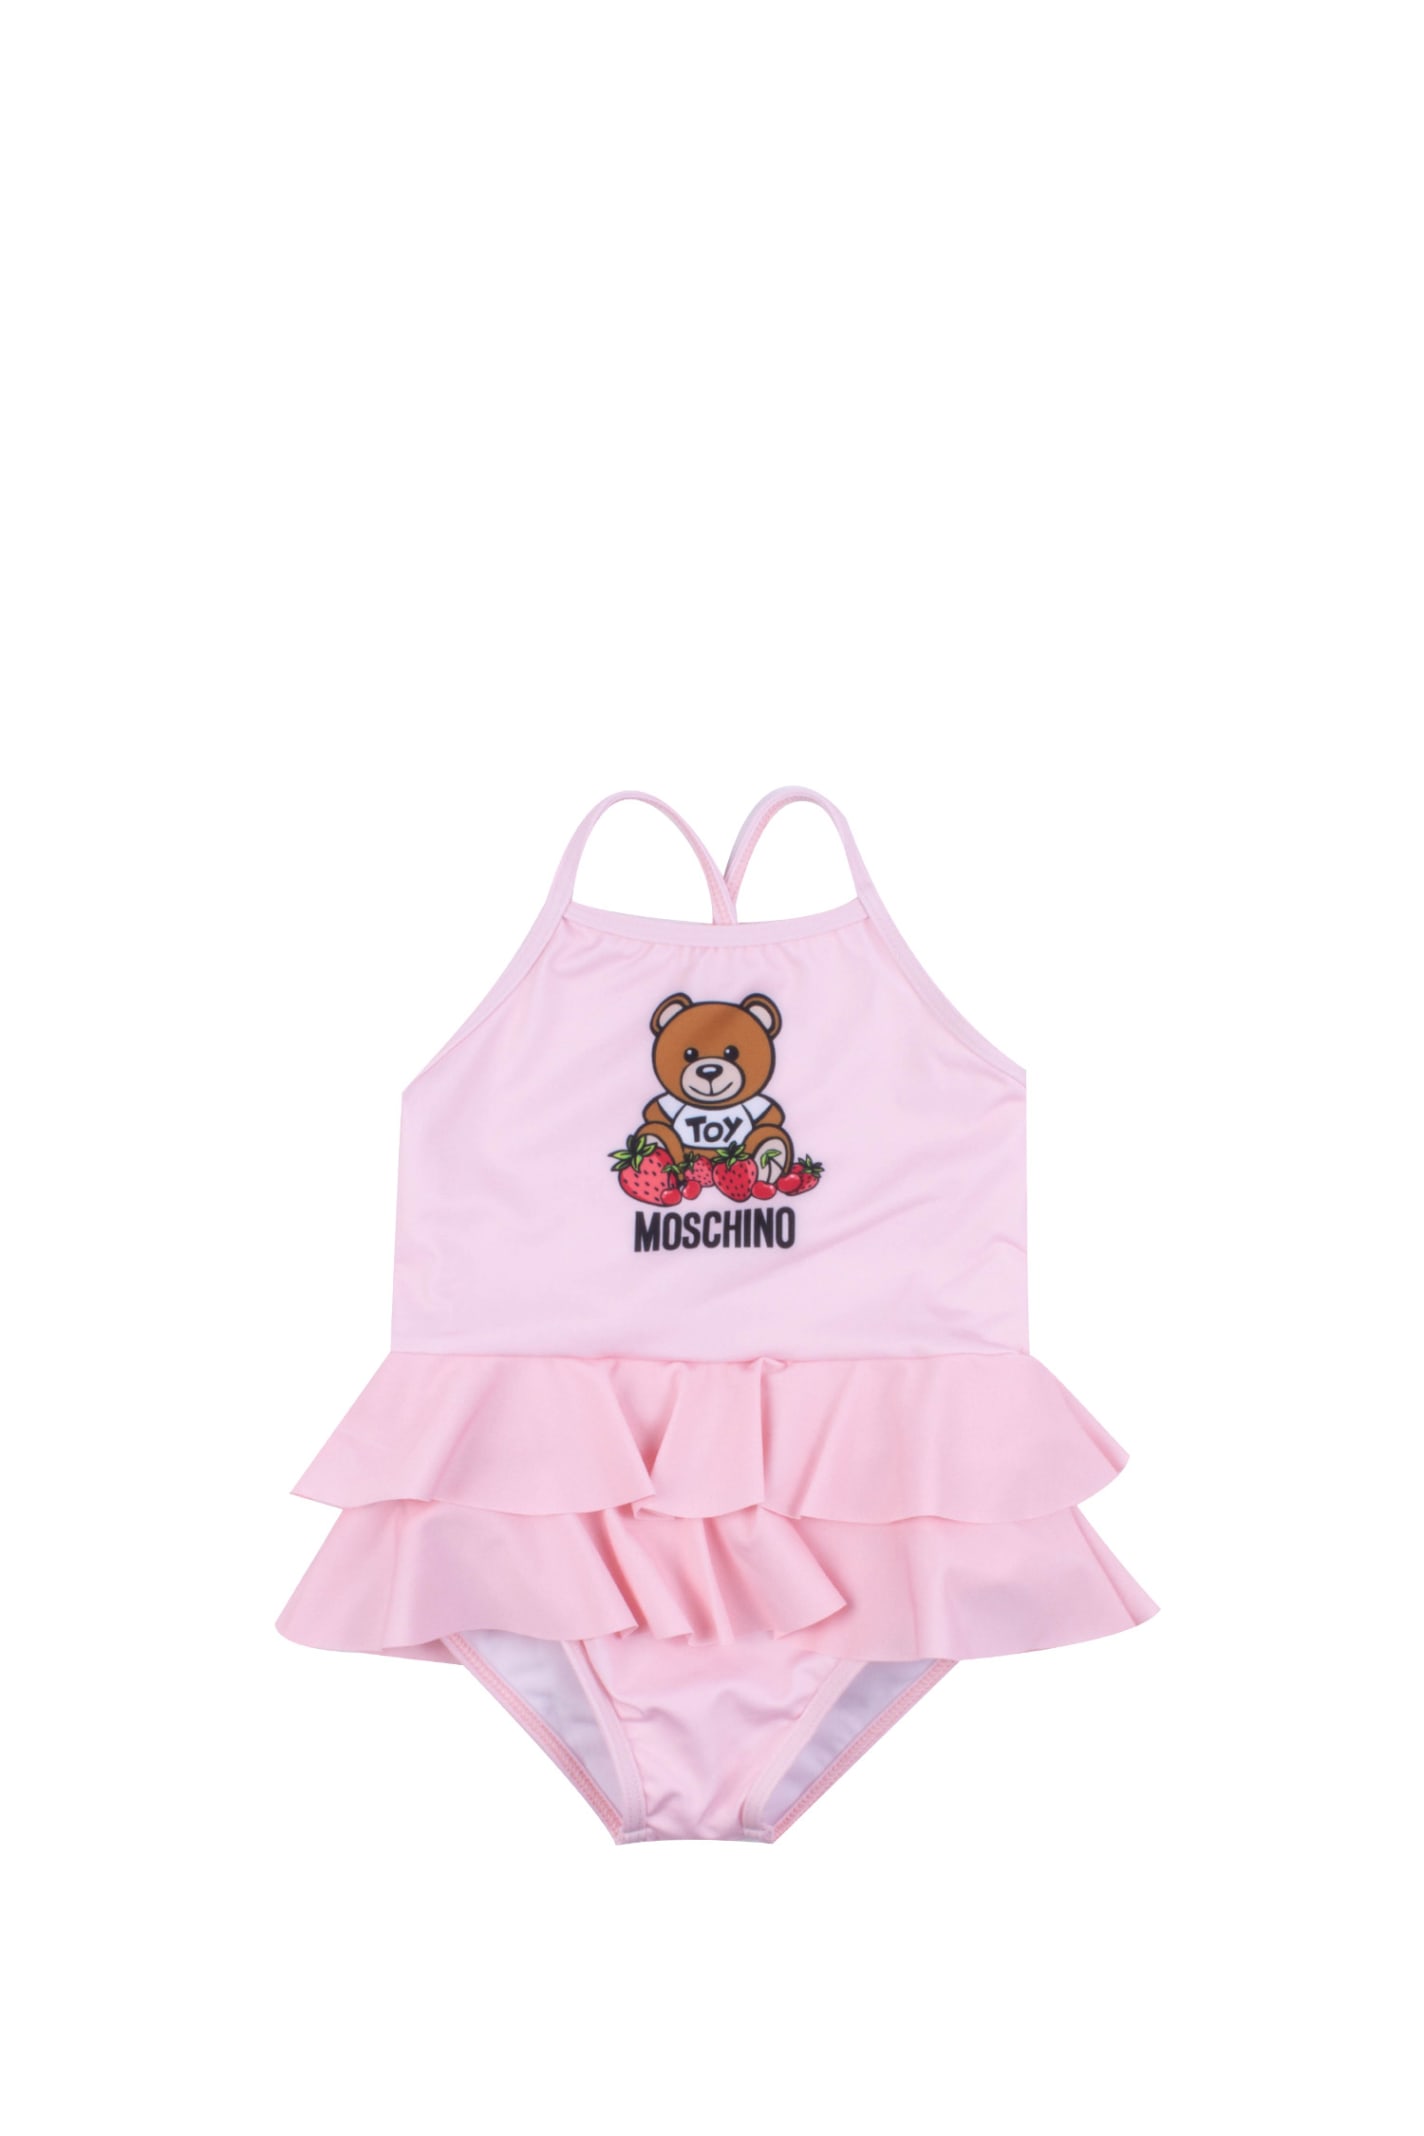 Moschino Babies' One Piece Swimsuit With Print In Pink